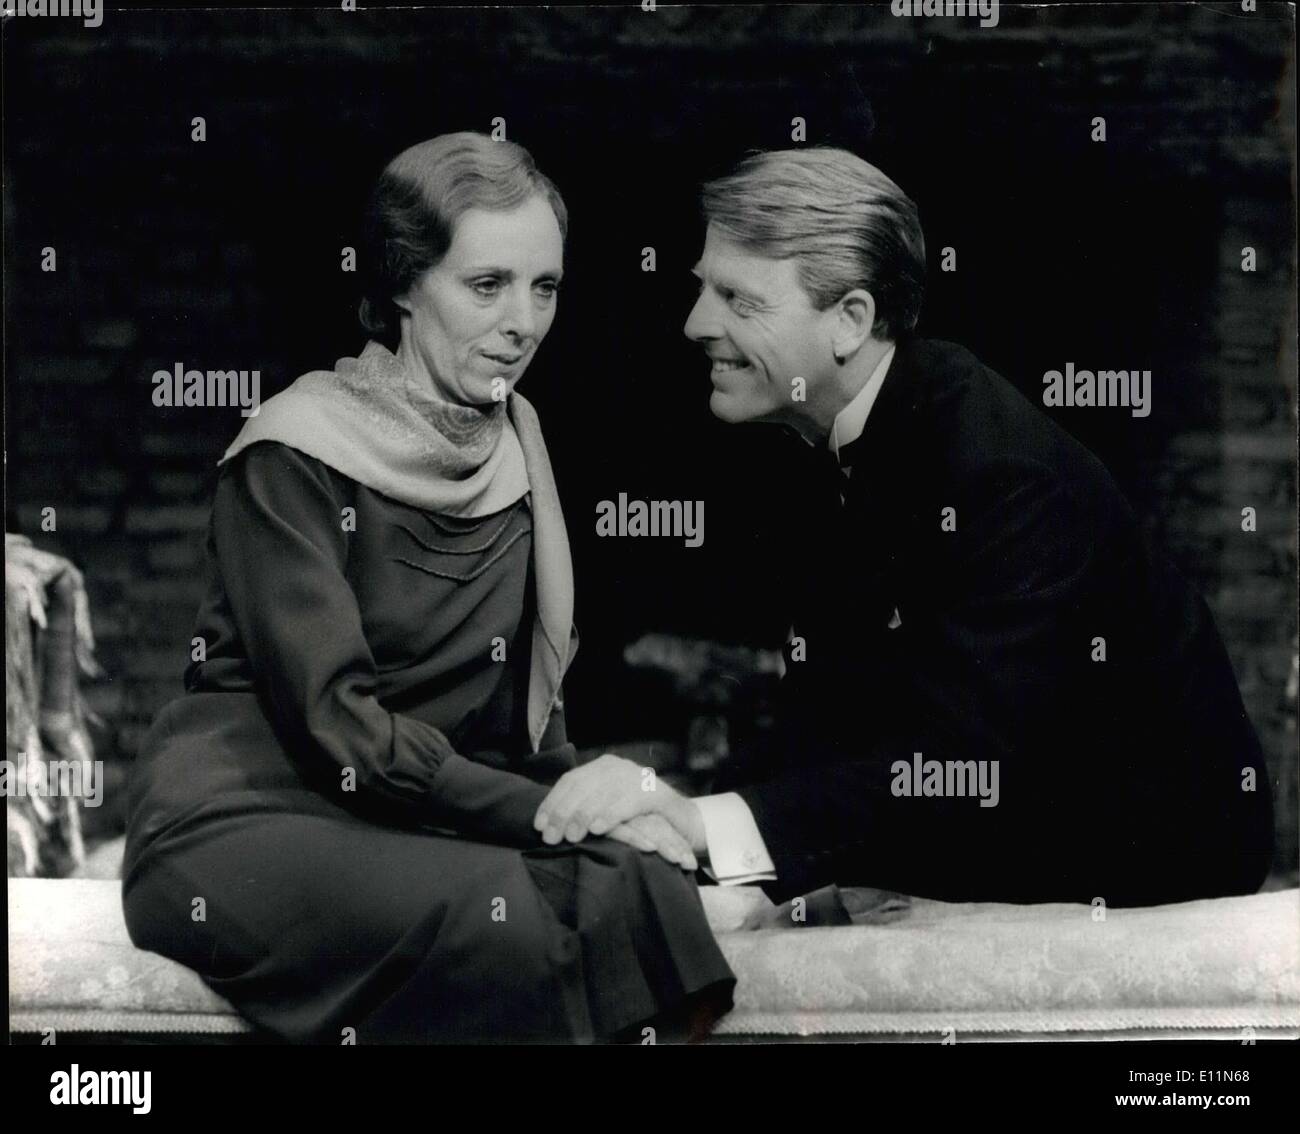 Jun. 14, 1979 - Edward Fox in ''The Family Reunion'': Edward Fox is to star in the T.S. Eliot play,'' The Family Reunion'' which opens at the Vaudeville Theater on June 19th. Photo shows Edward Fox, Harry, Lord Monchensey, and Joanna David, as Mary, during the photo call at the Vaudeville Theater today. Stock Photo